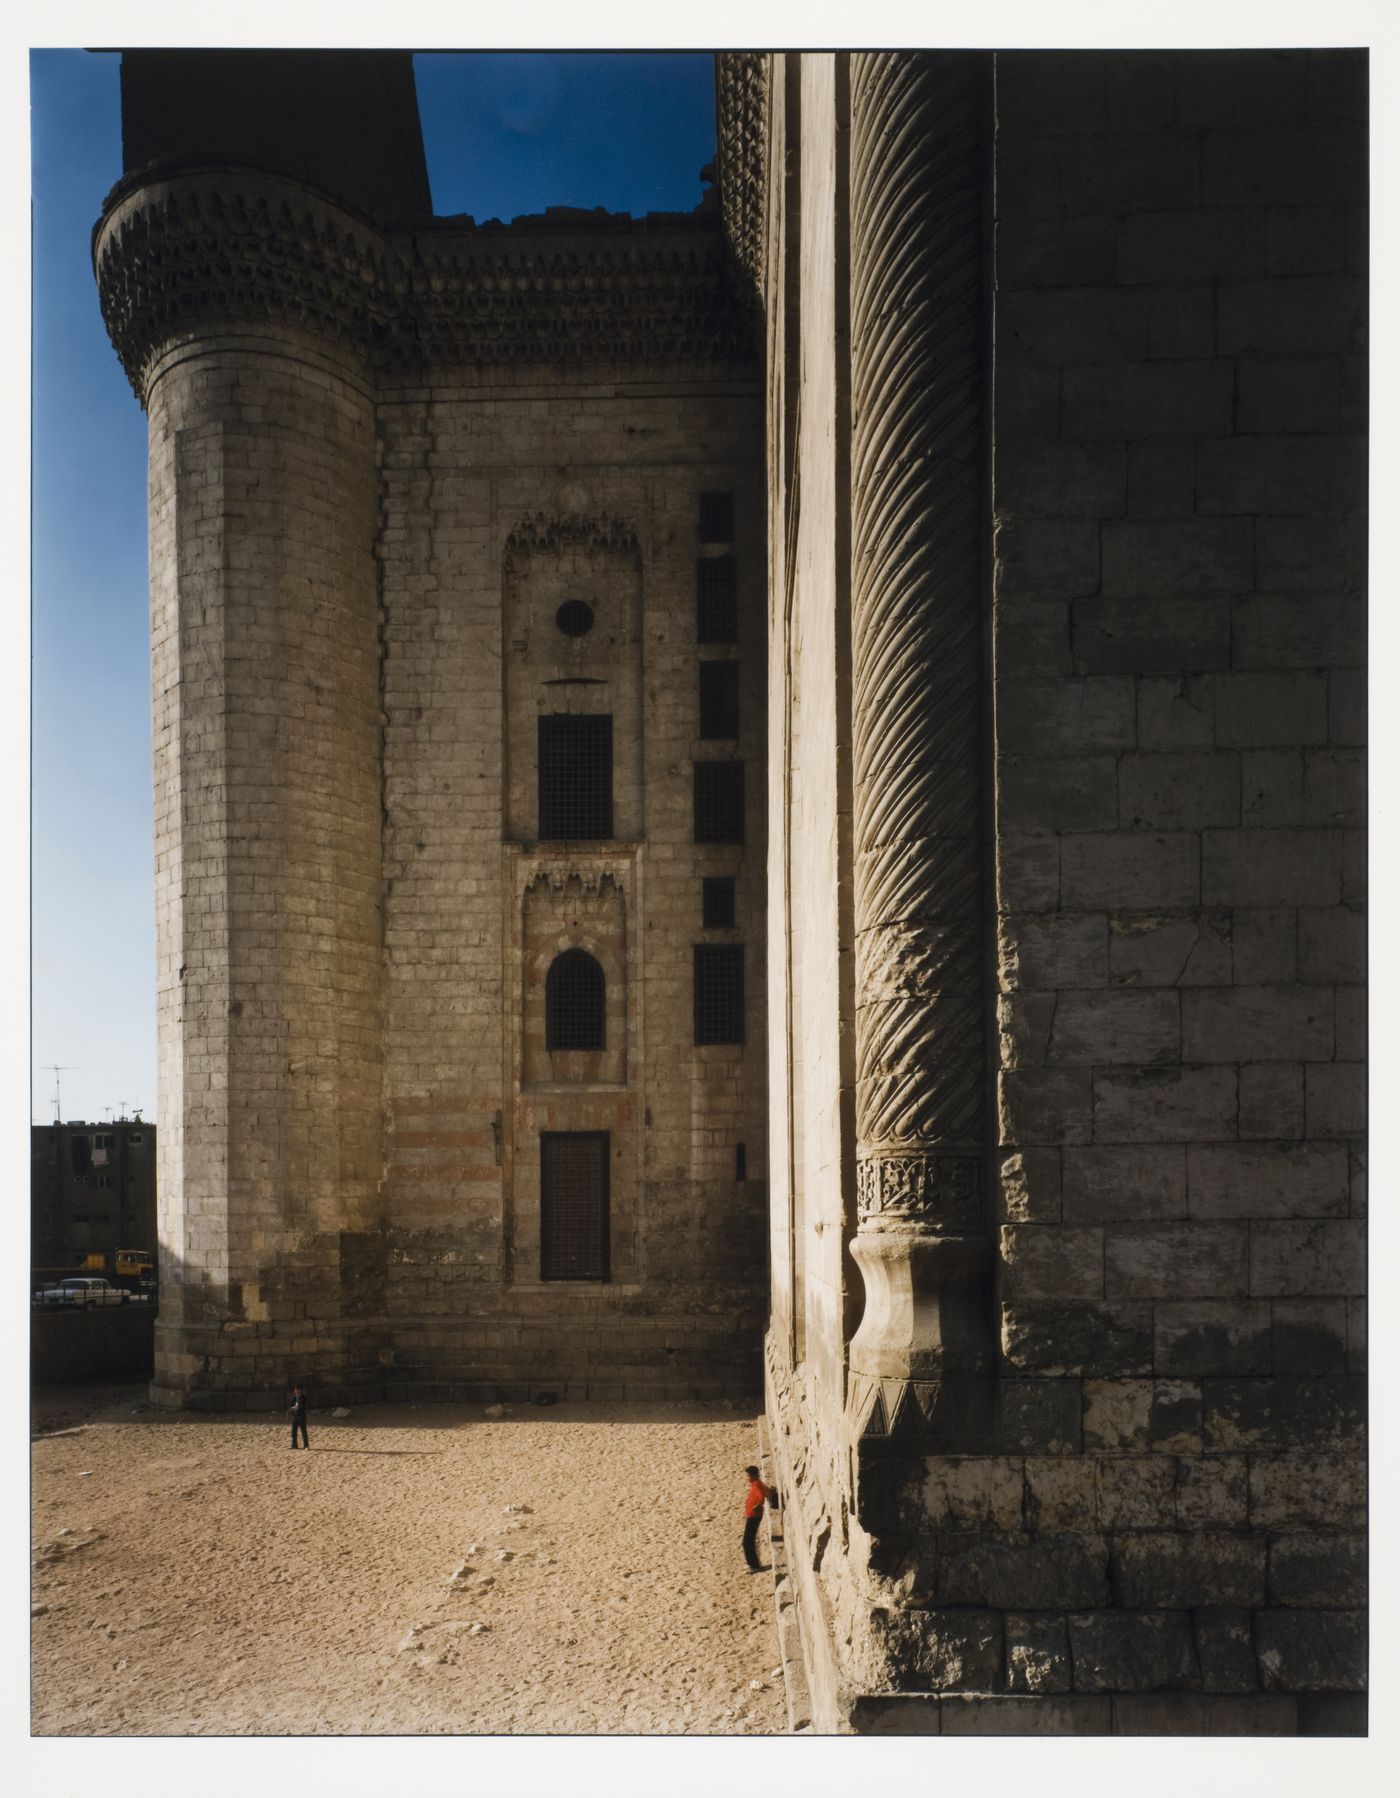 Mosque of Sultan Hassan, side view of building showing two corners and two figures on ground, Cairo, Egypt